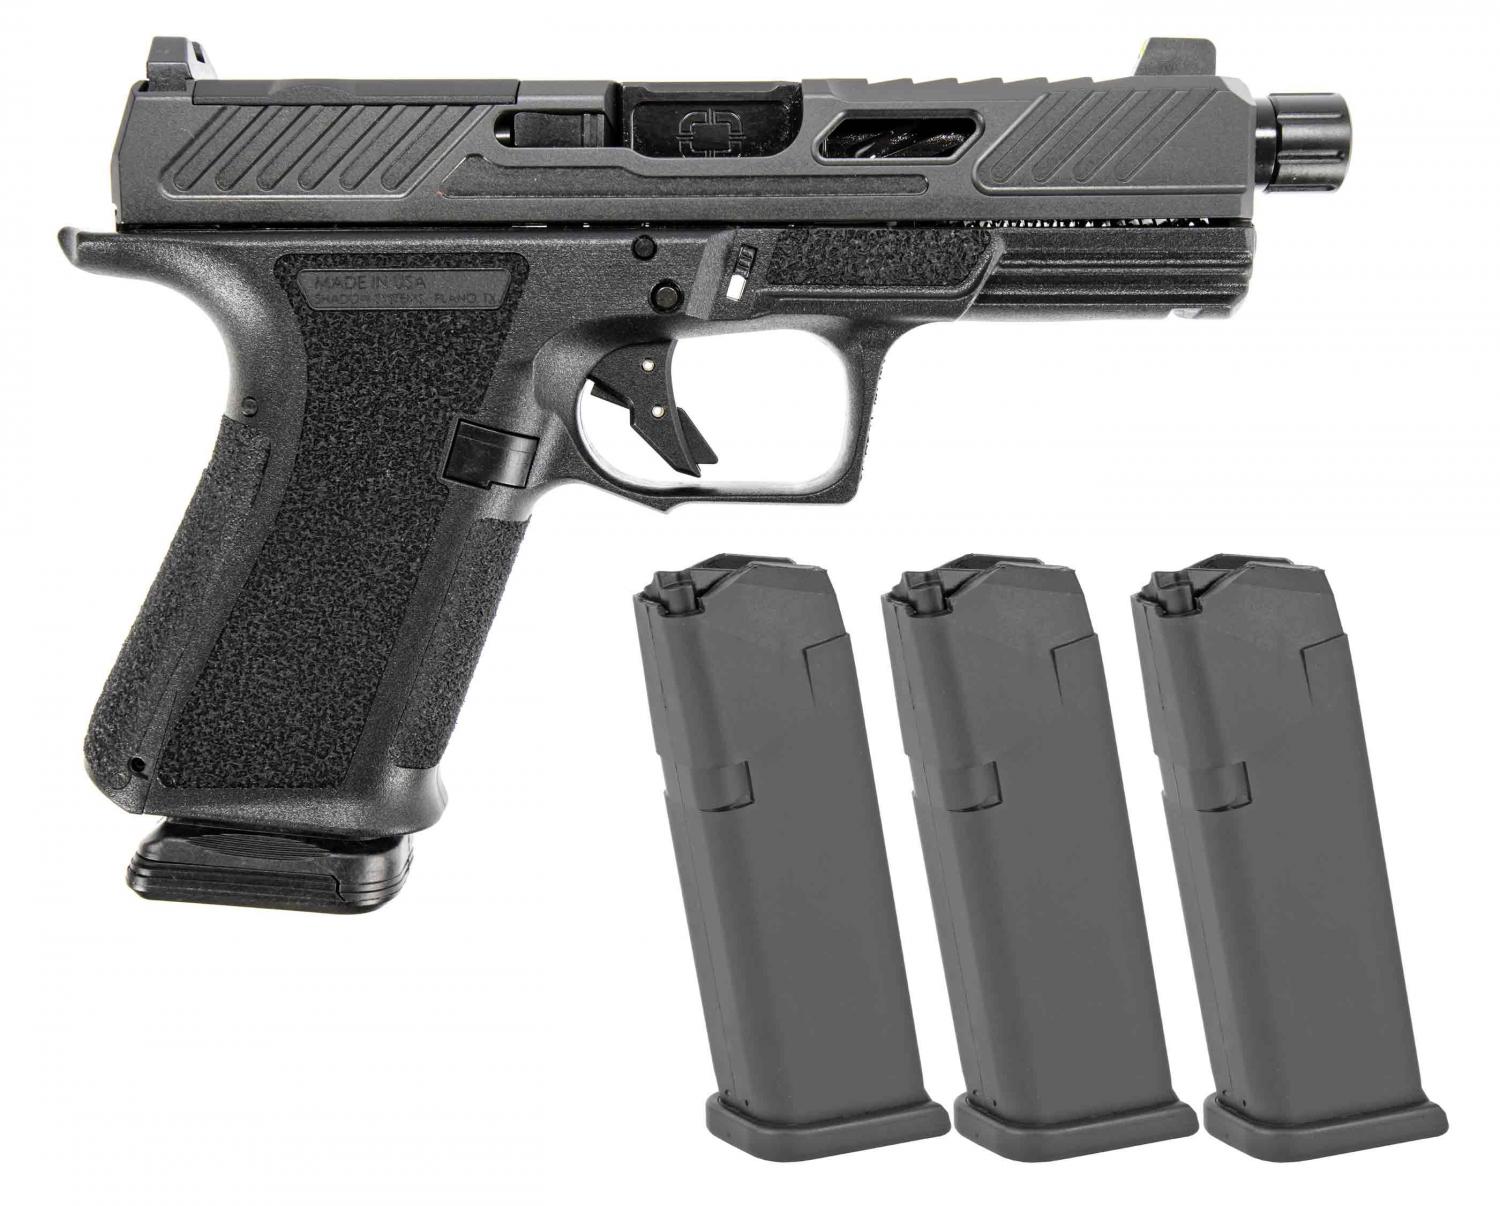 Shadow Systems MR920 Elite 9mm TB OR + 3 GLOCK compatible 15 rd Mags COMBO - $989 (Free S/H on Firearms)